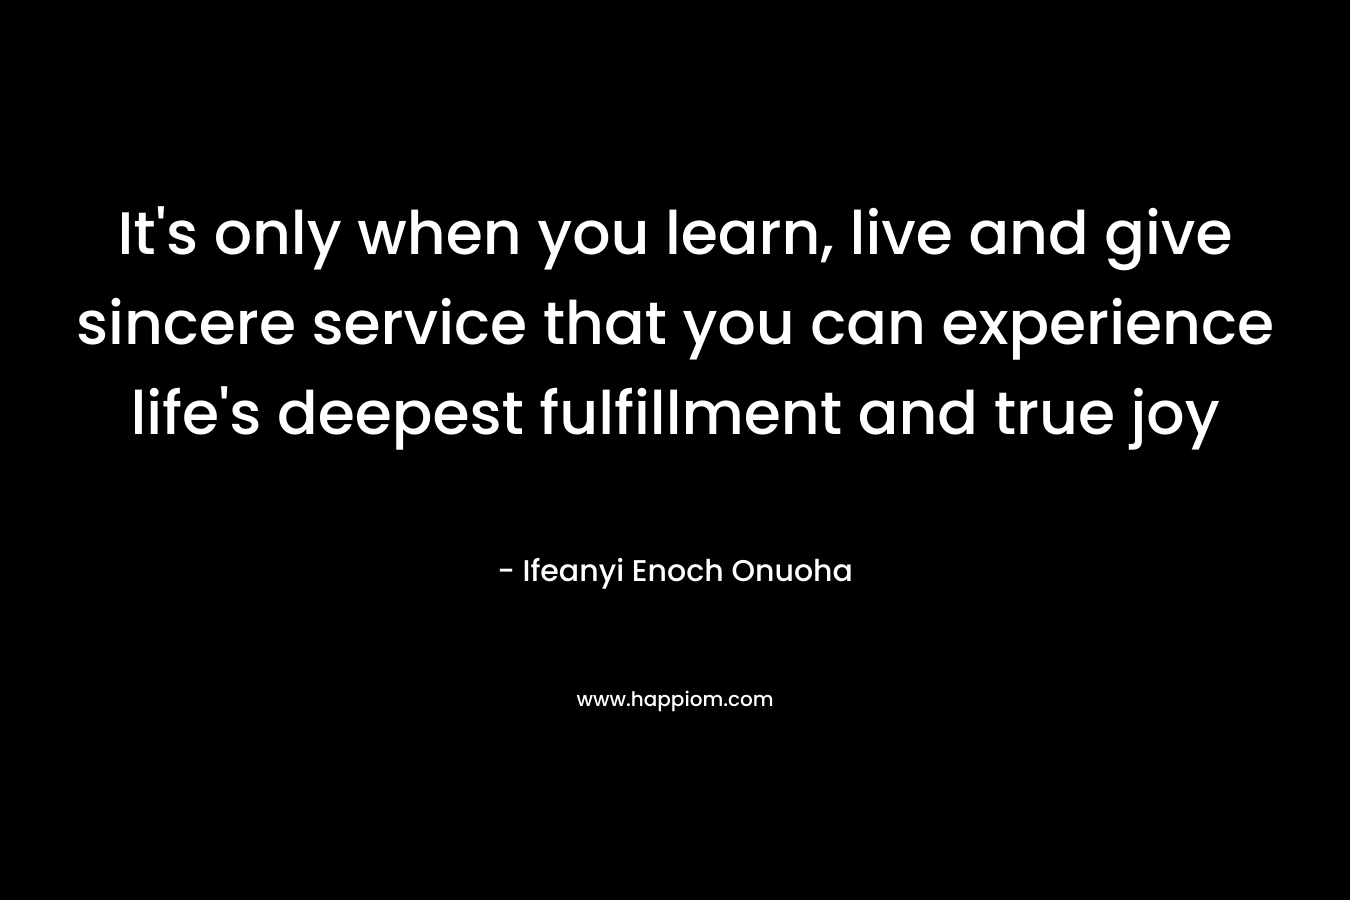 It's only when you learn, live and give sincere service that you can experience life's deepest fulfillment and true joy